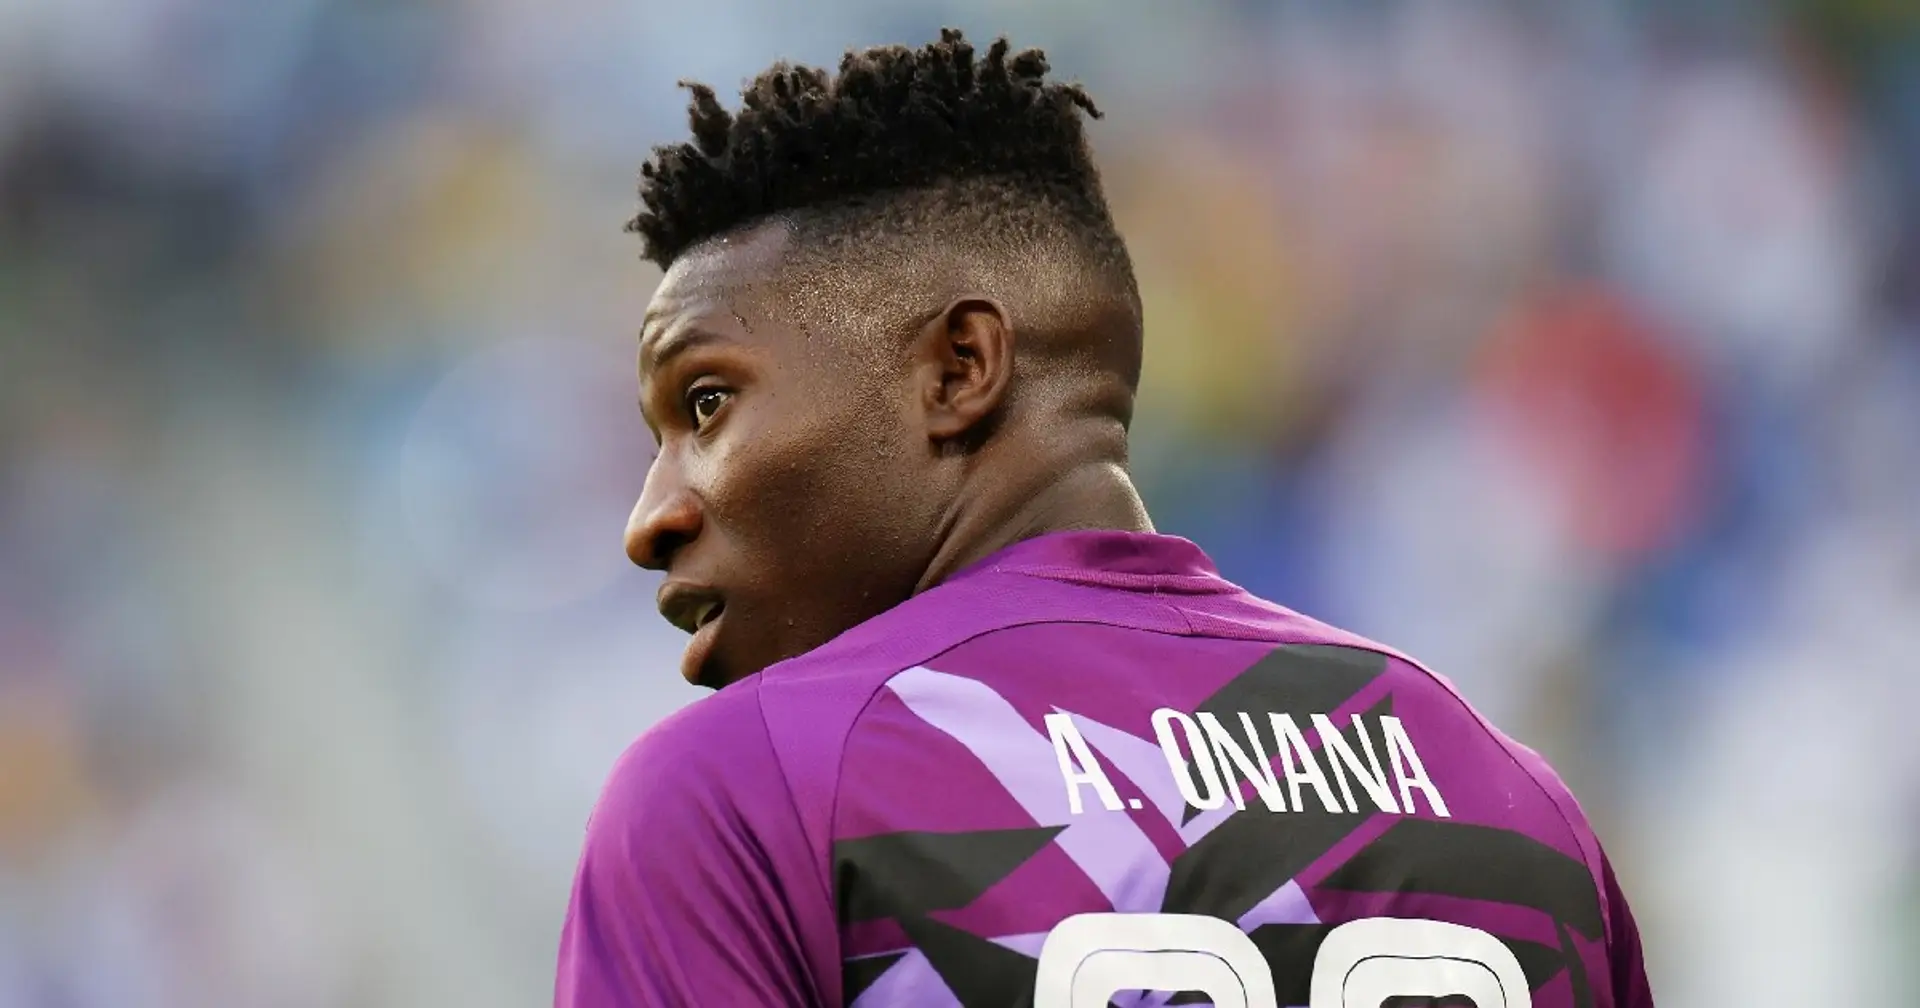 Andre Onana 'to quit' Cameroon national team again